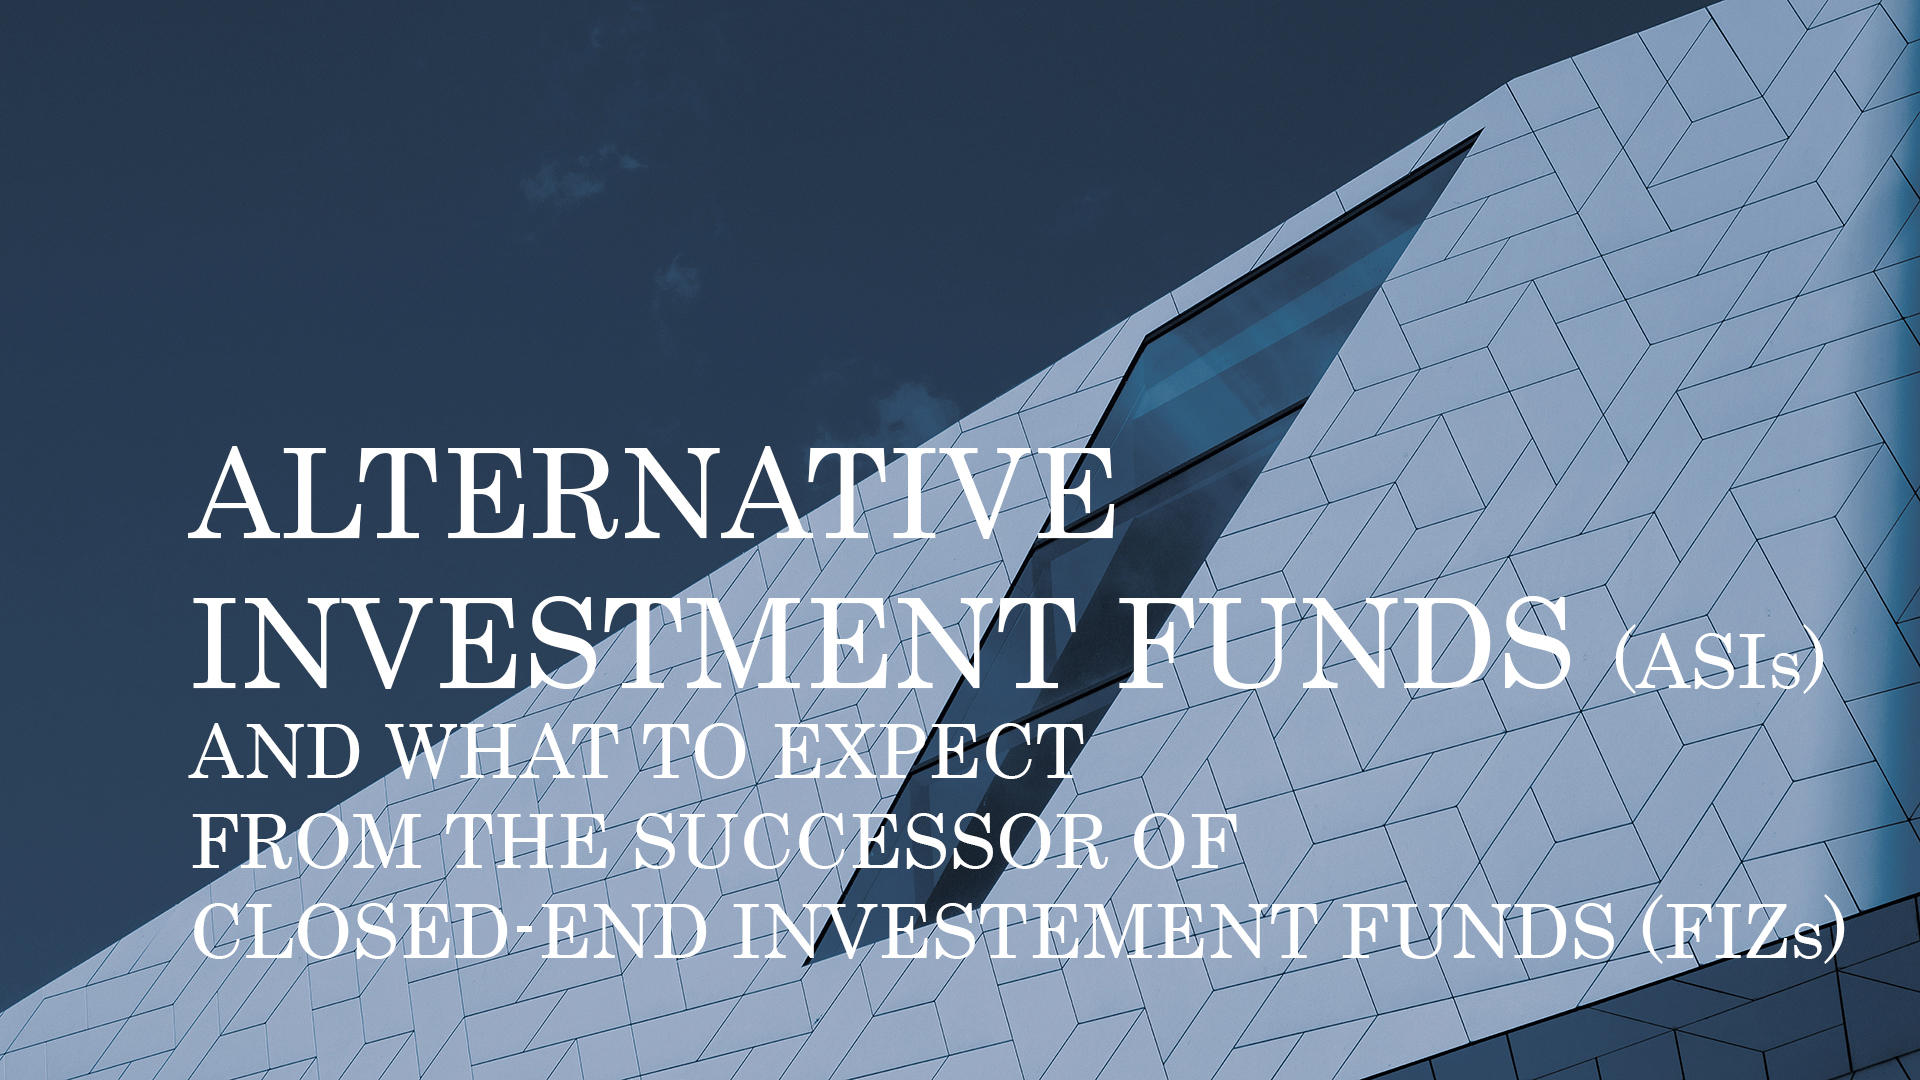 ALTERNATIVE INVESTMENT FUNDS (ASIs) AND WHAT TO EXPECT FROM THE SUCCESSOR OF CLOSED-END INVESTEMENT FUNDS (FIZs)